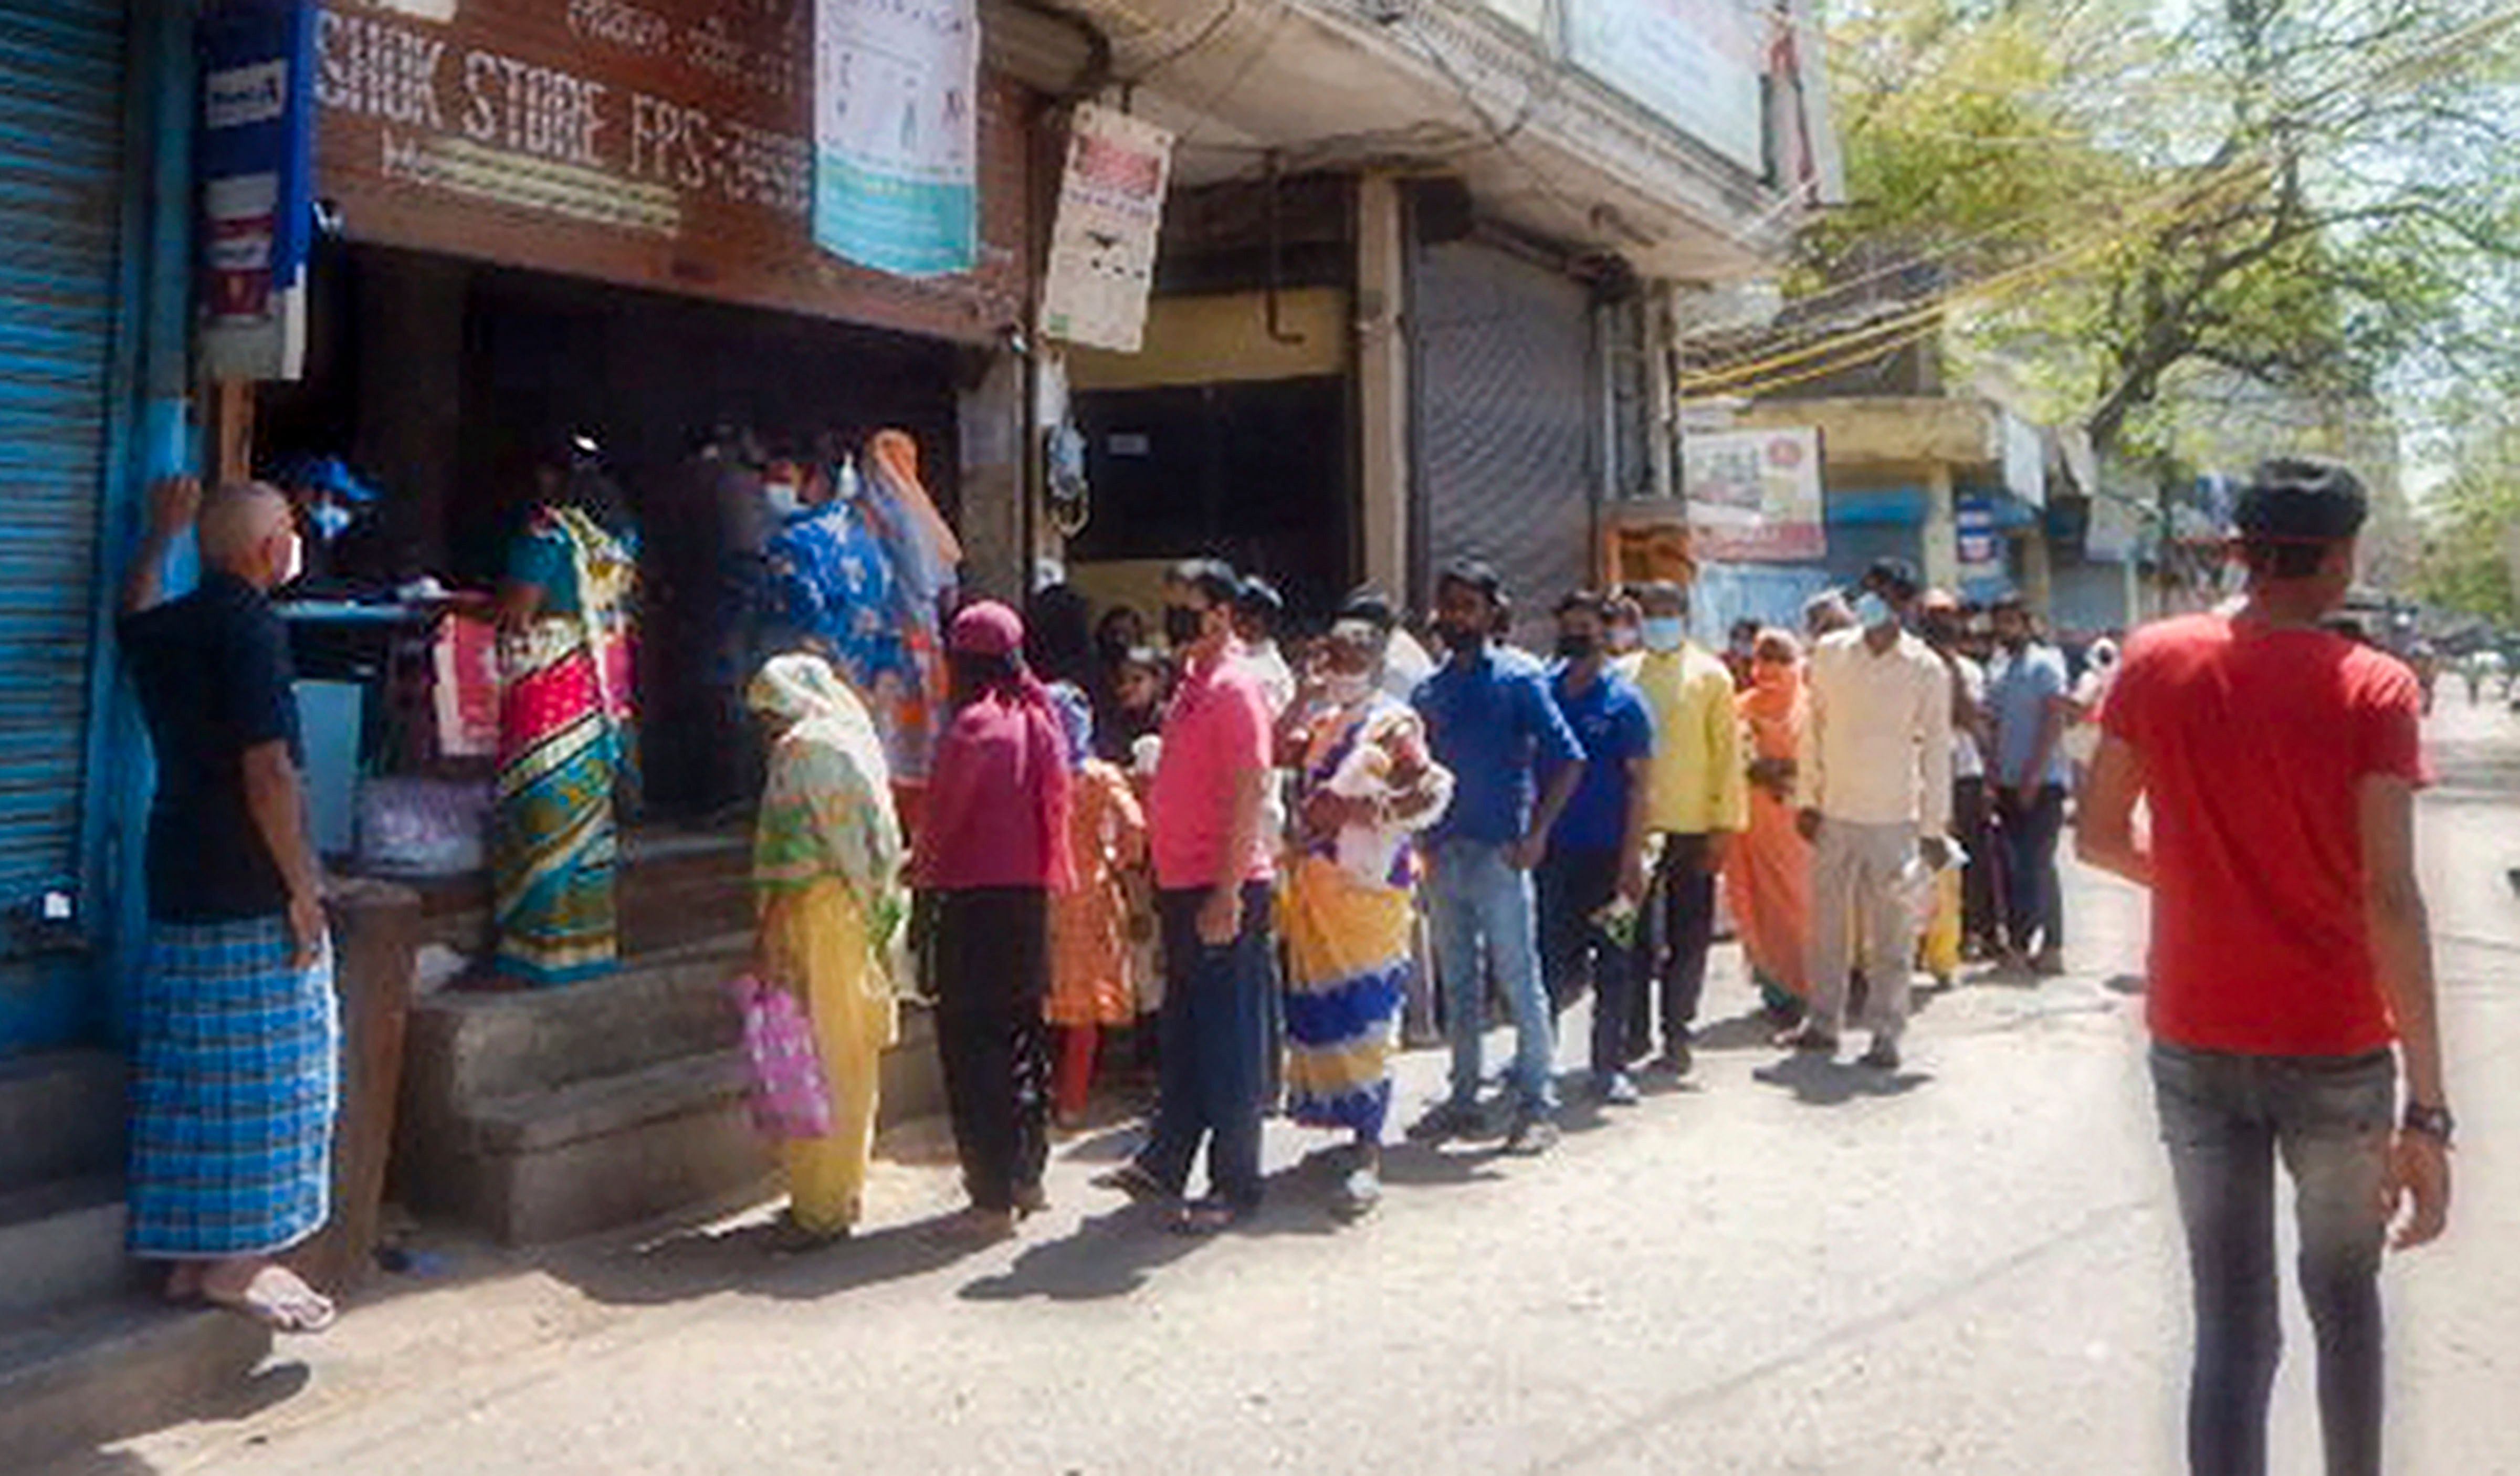 PDS beneficiaries stand in a queue before a ration depot to receive free 5kg grains under the Pradhan Mantri Garib Kalyan Yojana (PMGKY) during the nationwide lockdown amid coronavirus outbreak. (Credit: PTI)